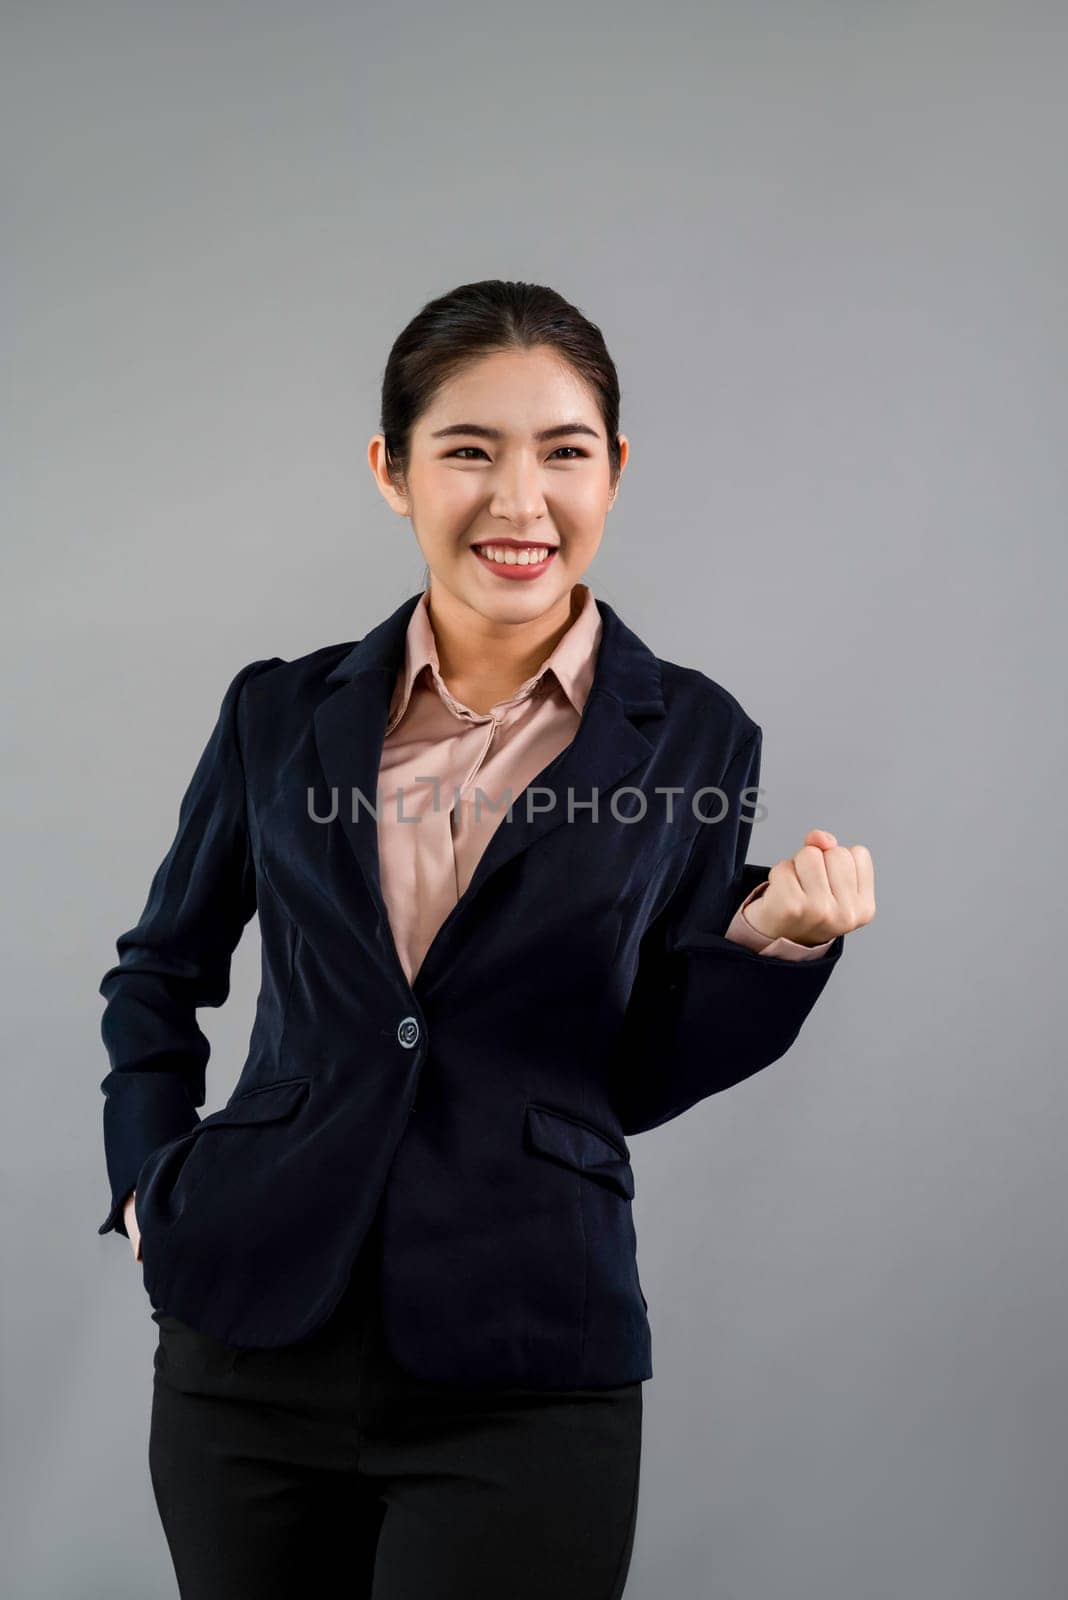 Confident young asian businesswoman in formal suit making hand gesture to indicate promotion or advertising with surprised face expression and gesture on isolated background. Enthusiastic